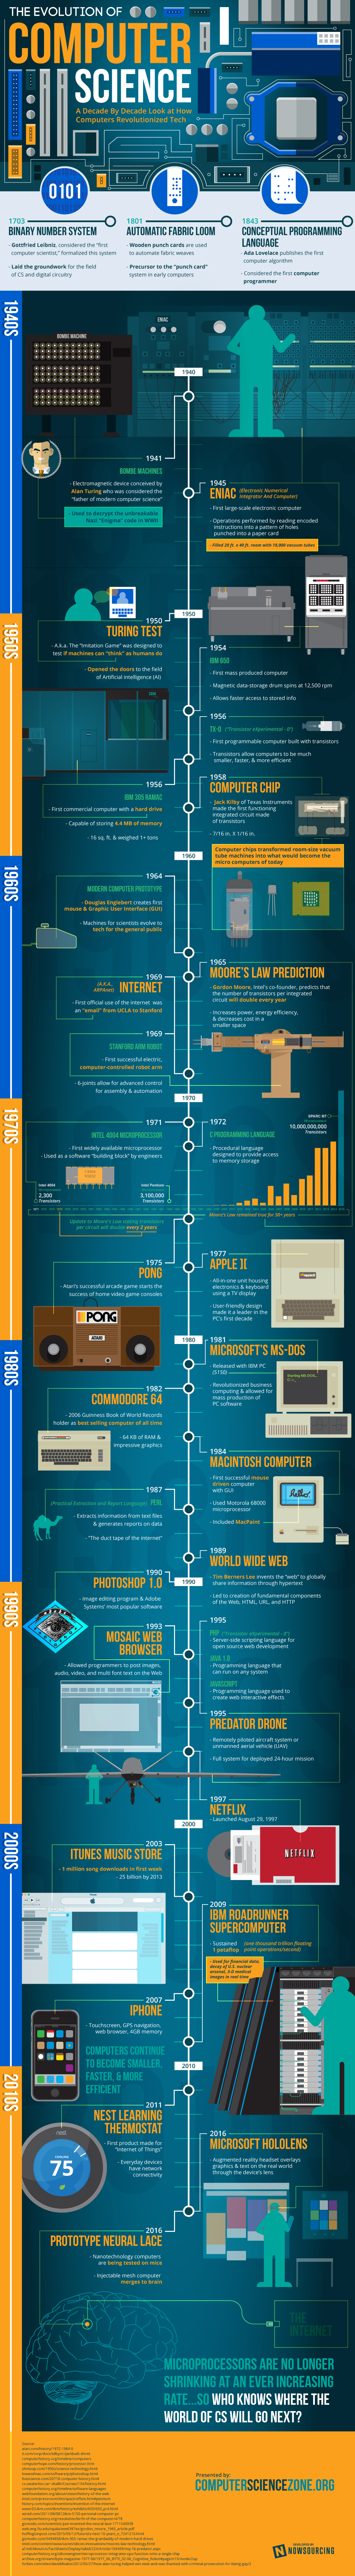 The Evolution of Computer Science in One Infographic